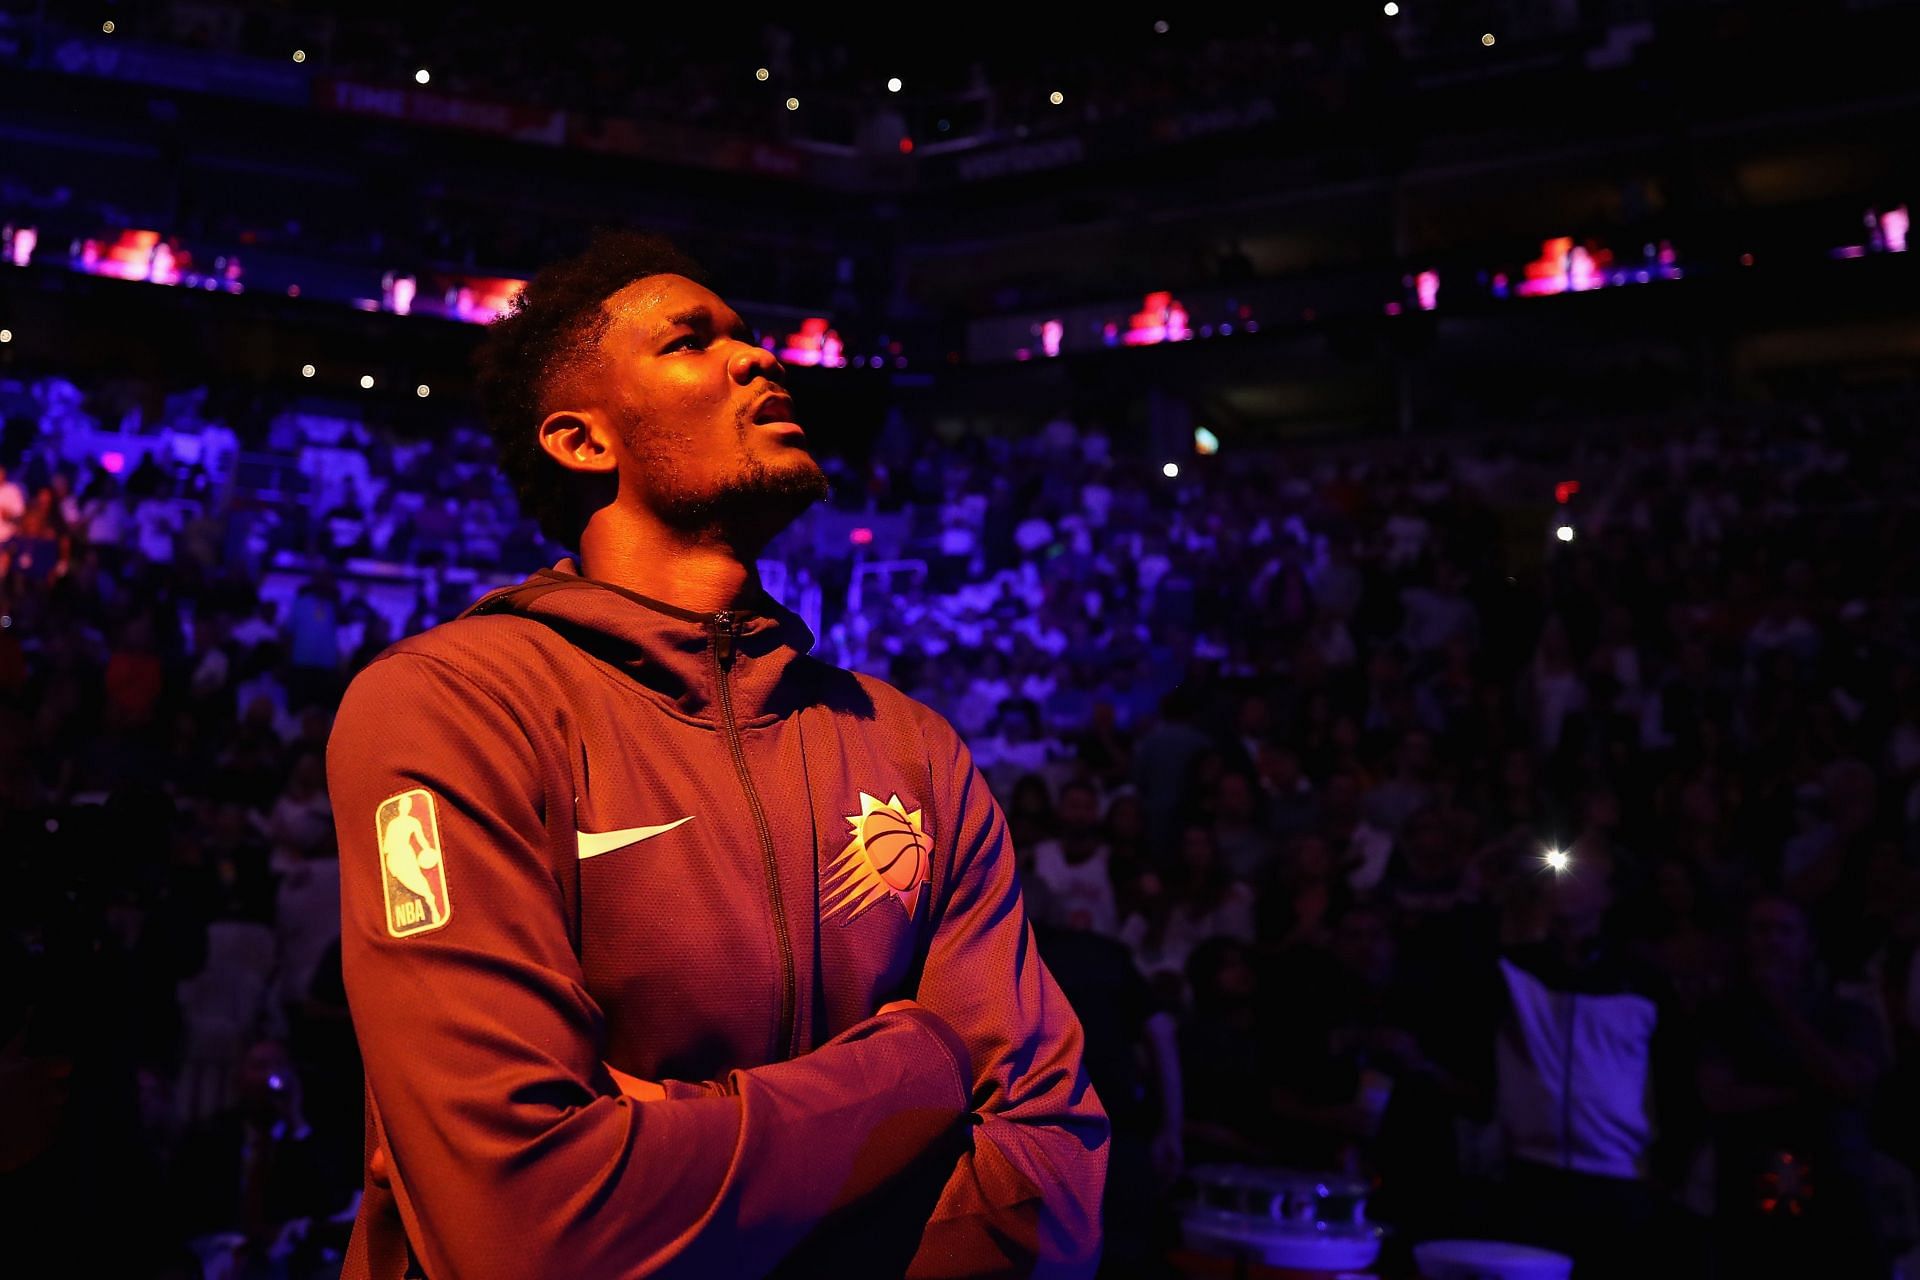 Phoenix Suns fans will wait patiently to see what happens with Deandre Ayton